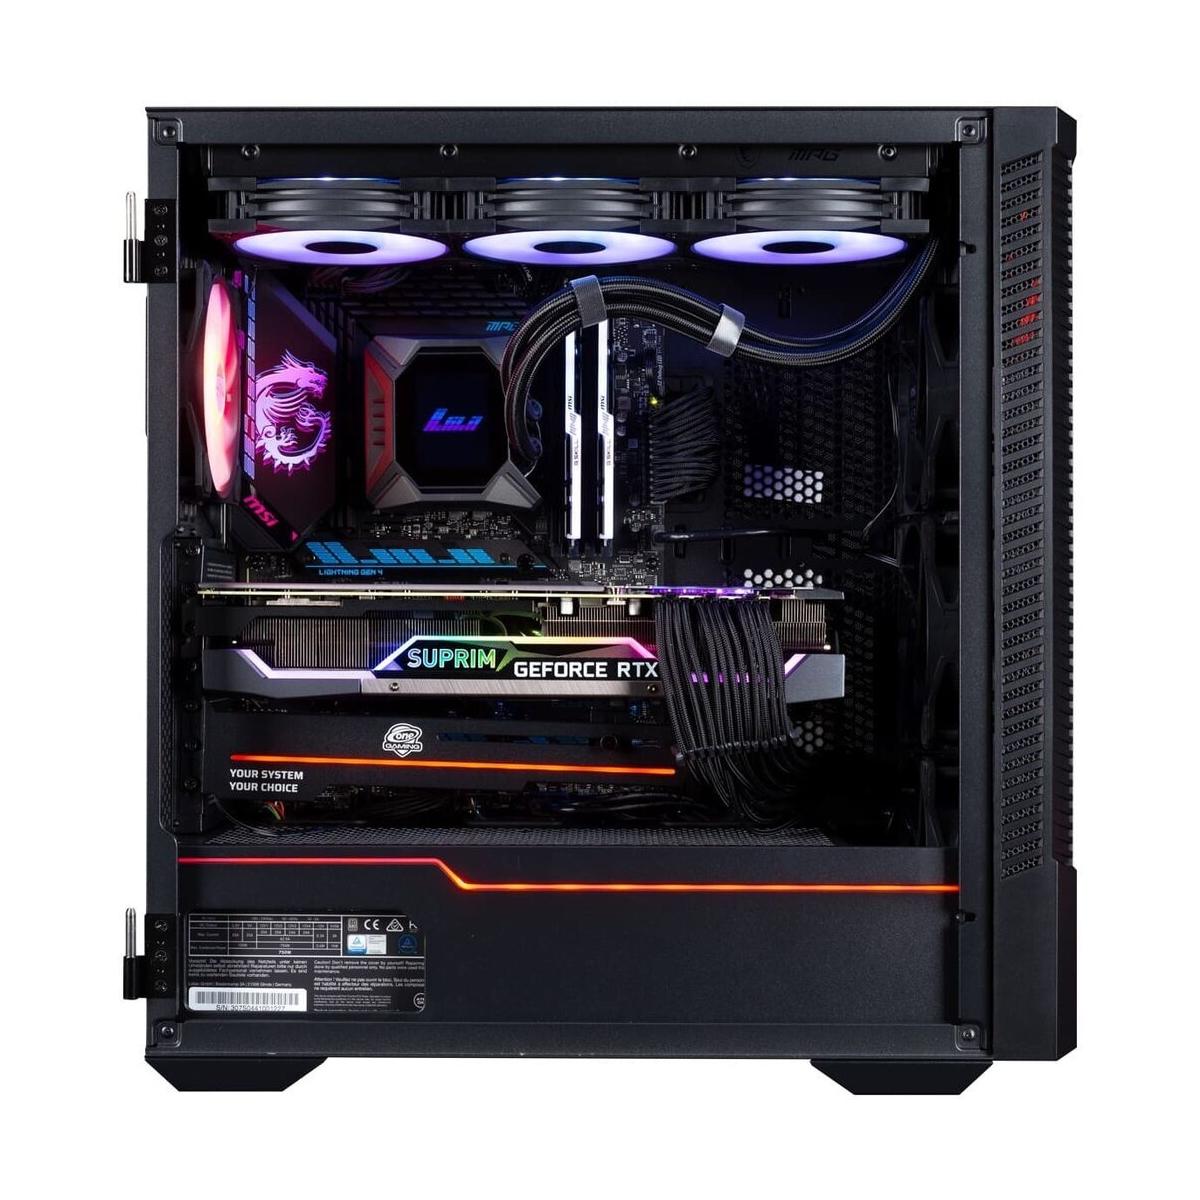 Gaming PC Ultra IN08 powered by MSI - Core i7-12700KF - RTX 3070 Ti